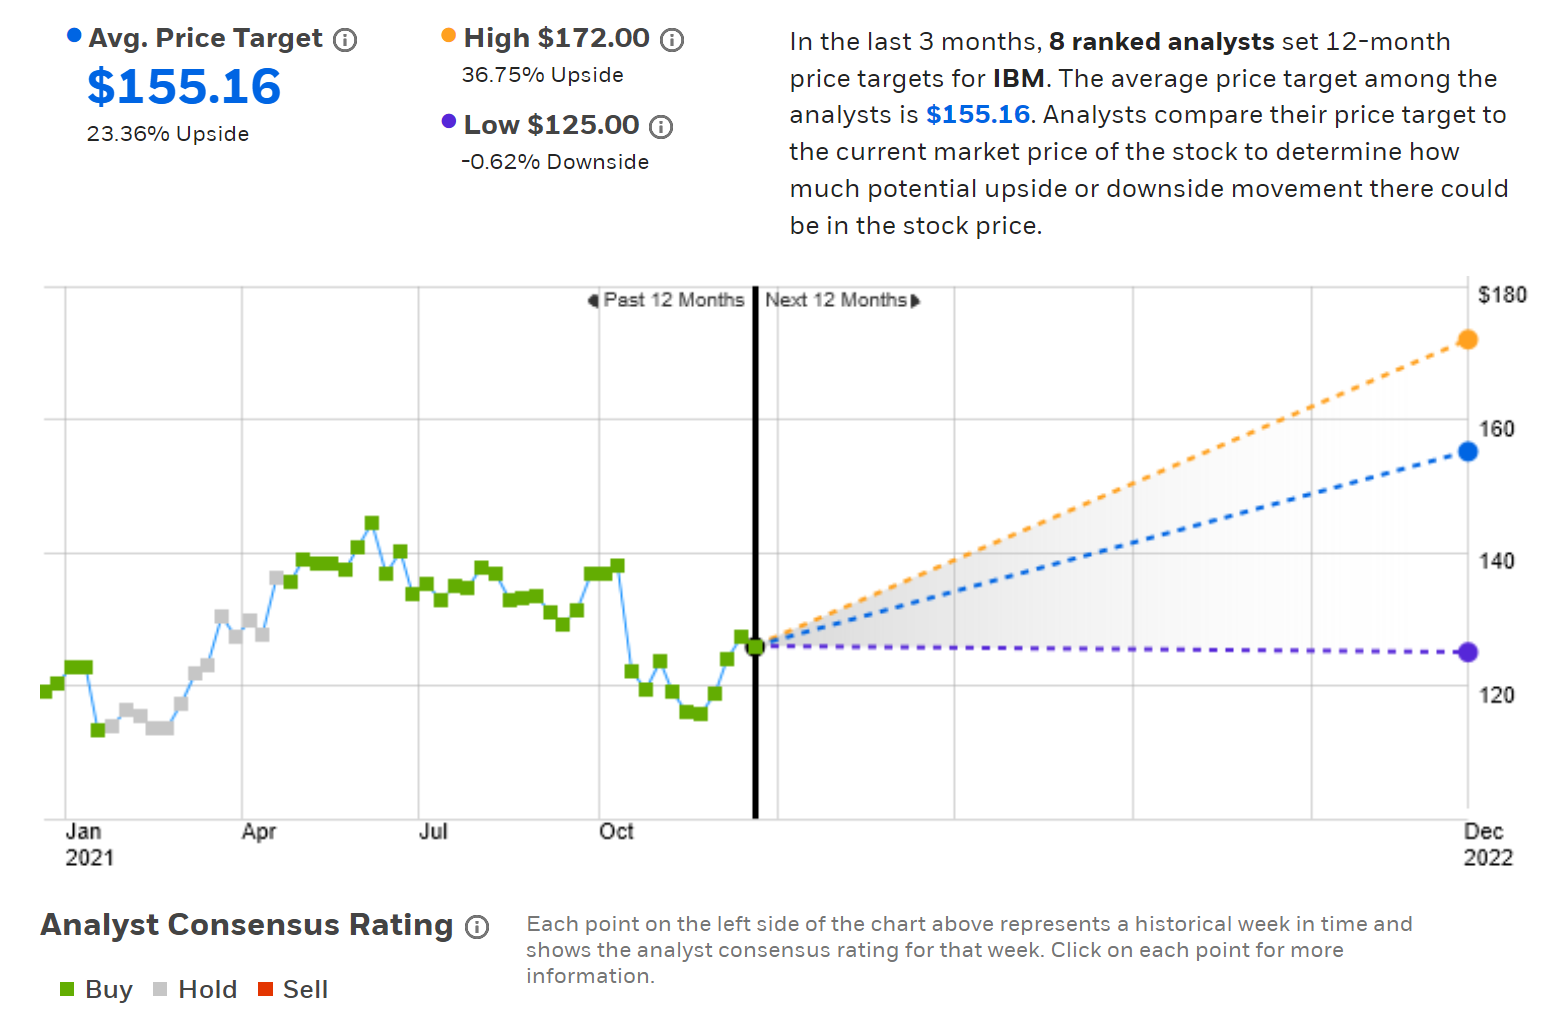 IBM Analyst Consensus Rating And 12-Month Price Target